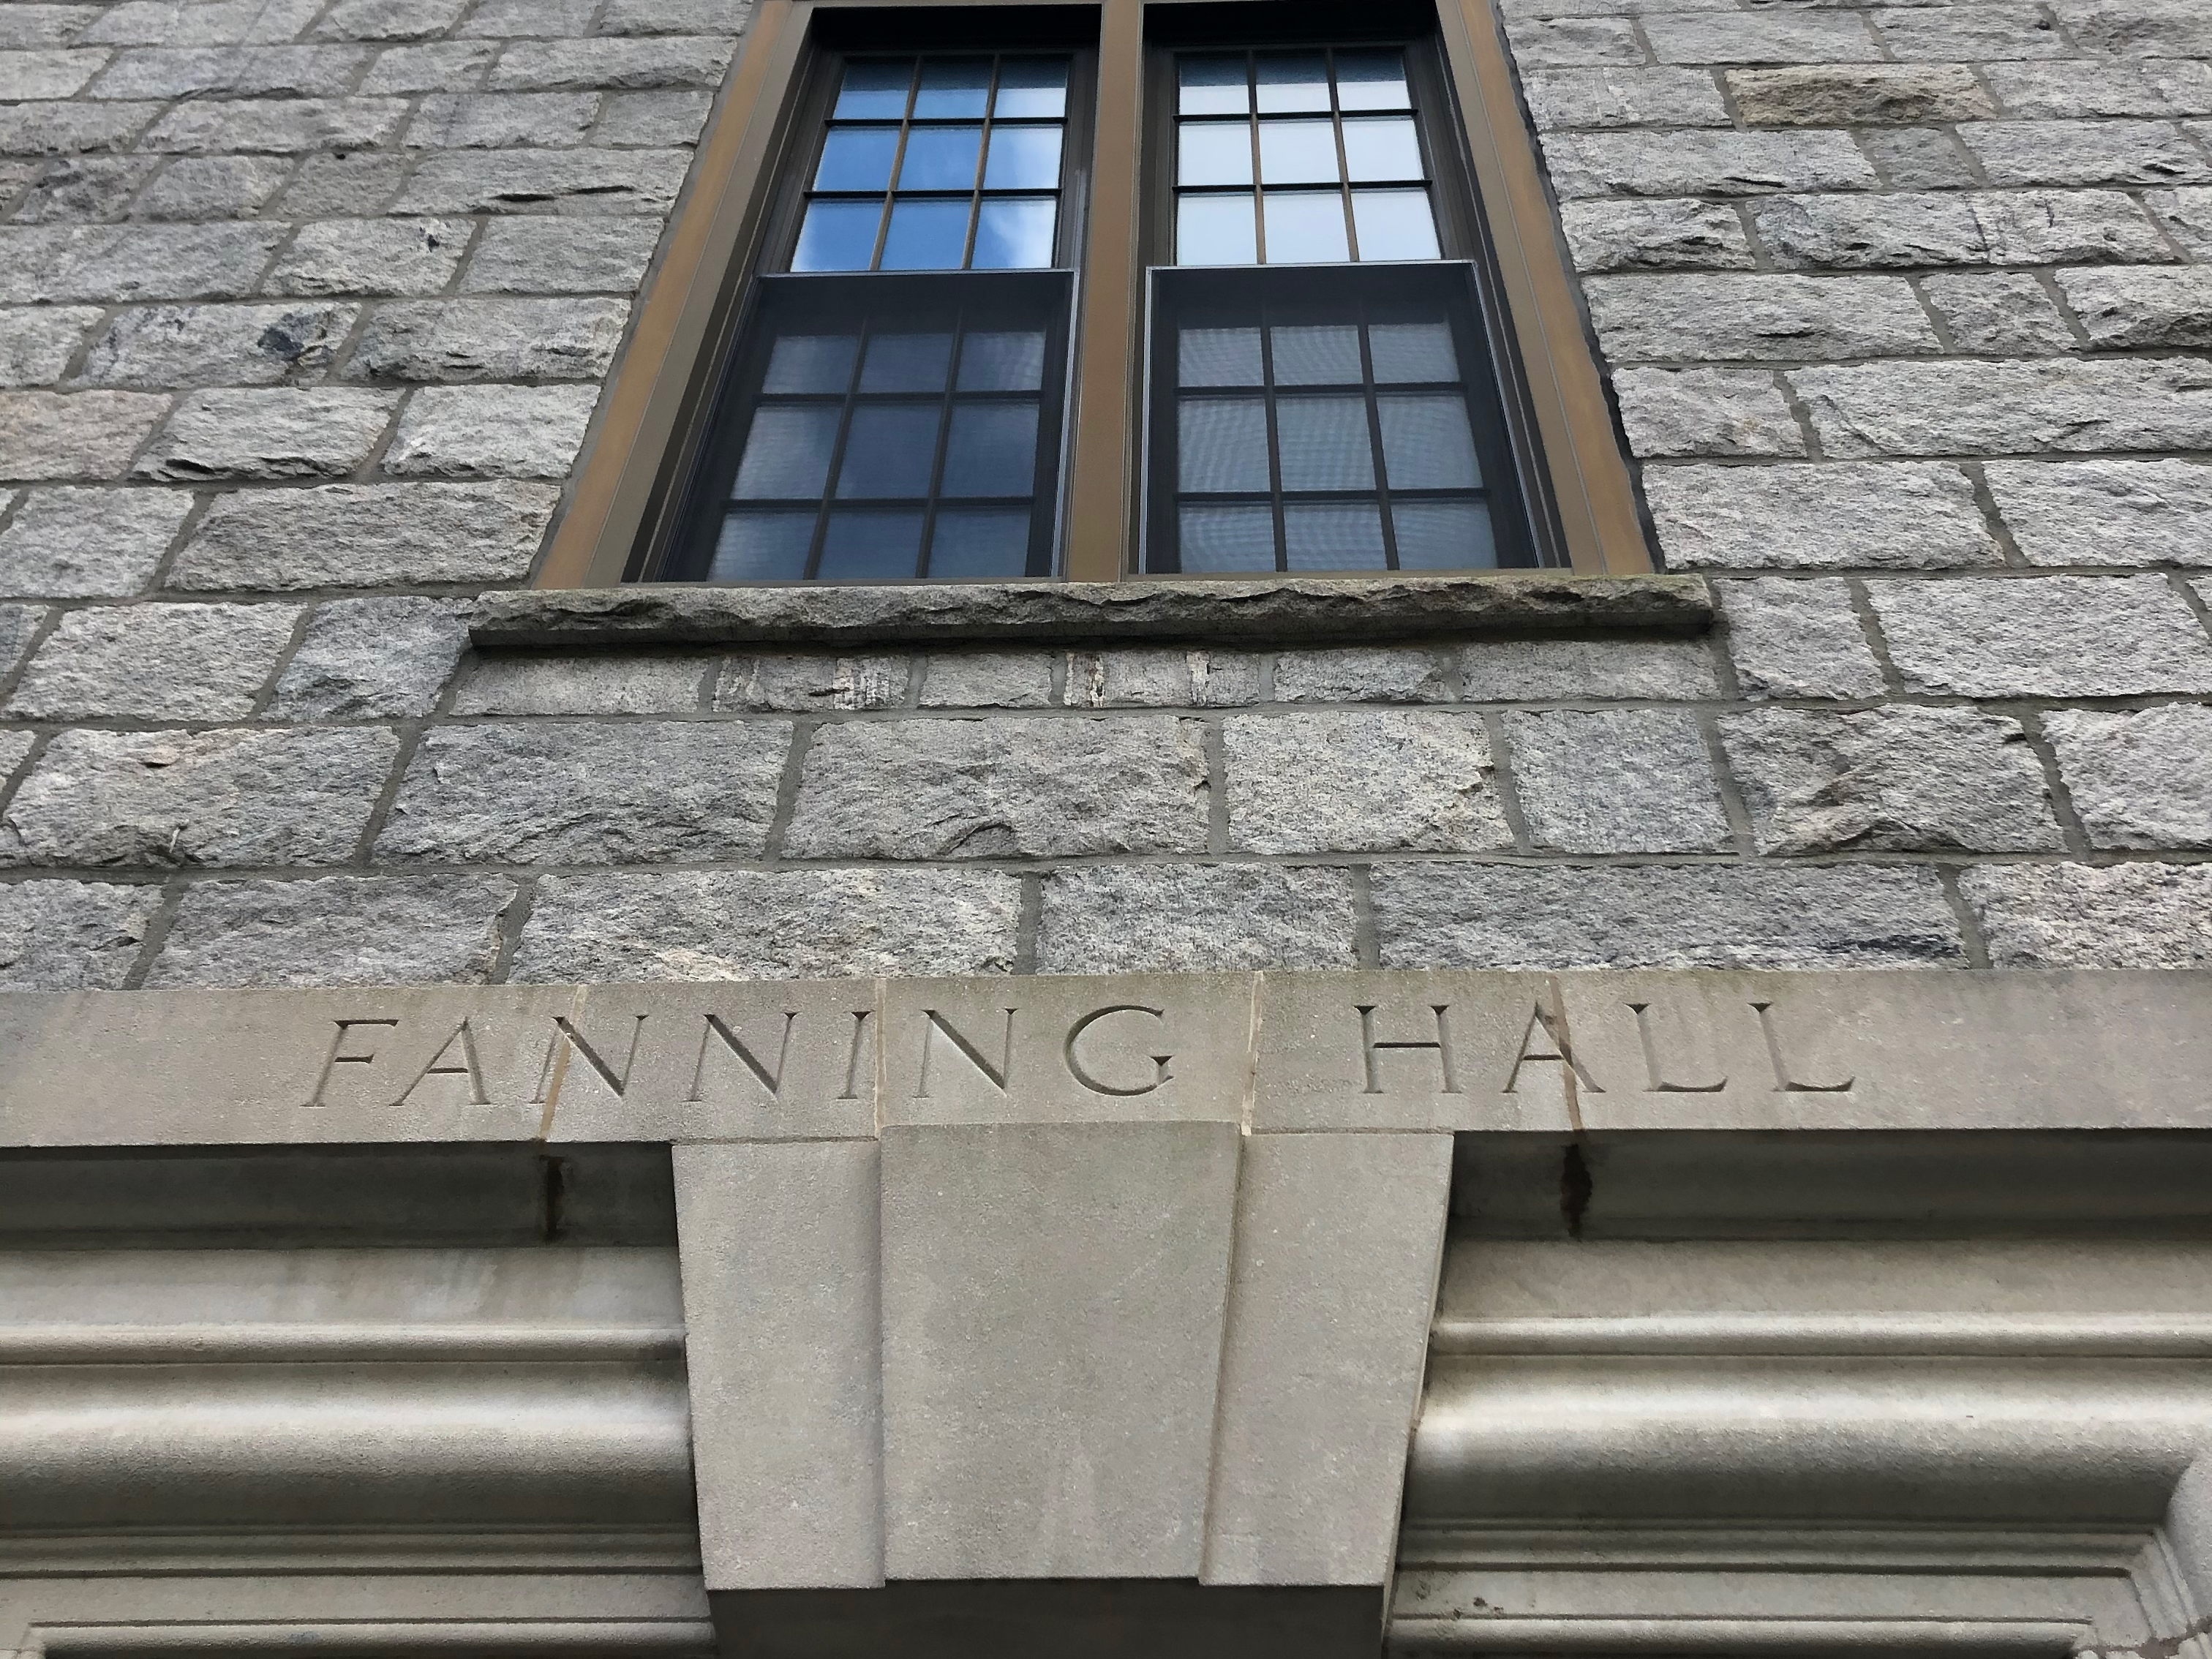 thecollegevoice.org: A History of the Fanning Uprisings